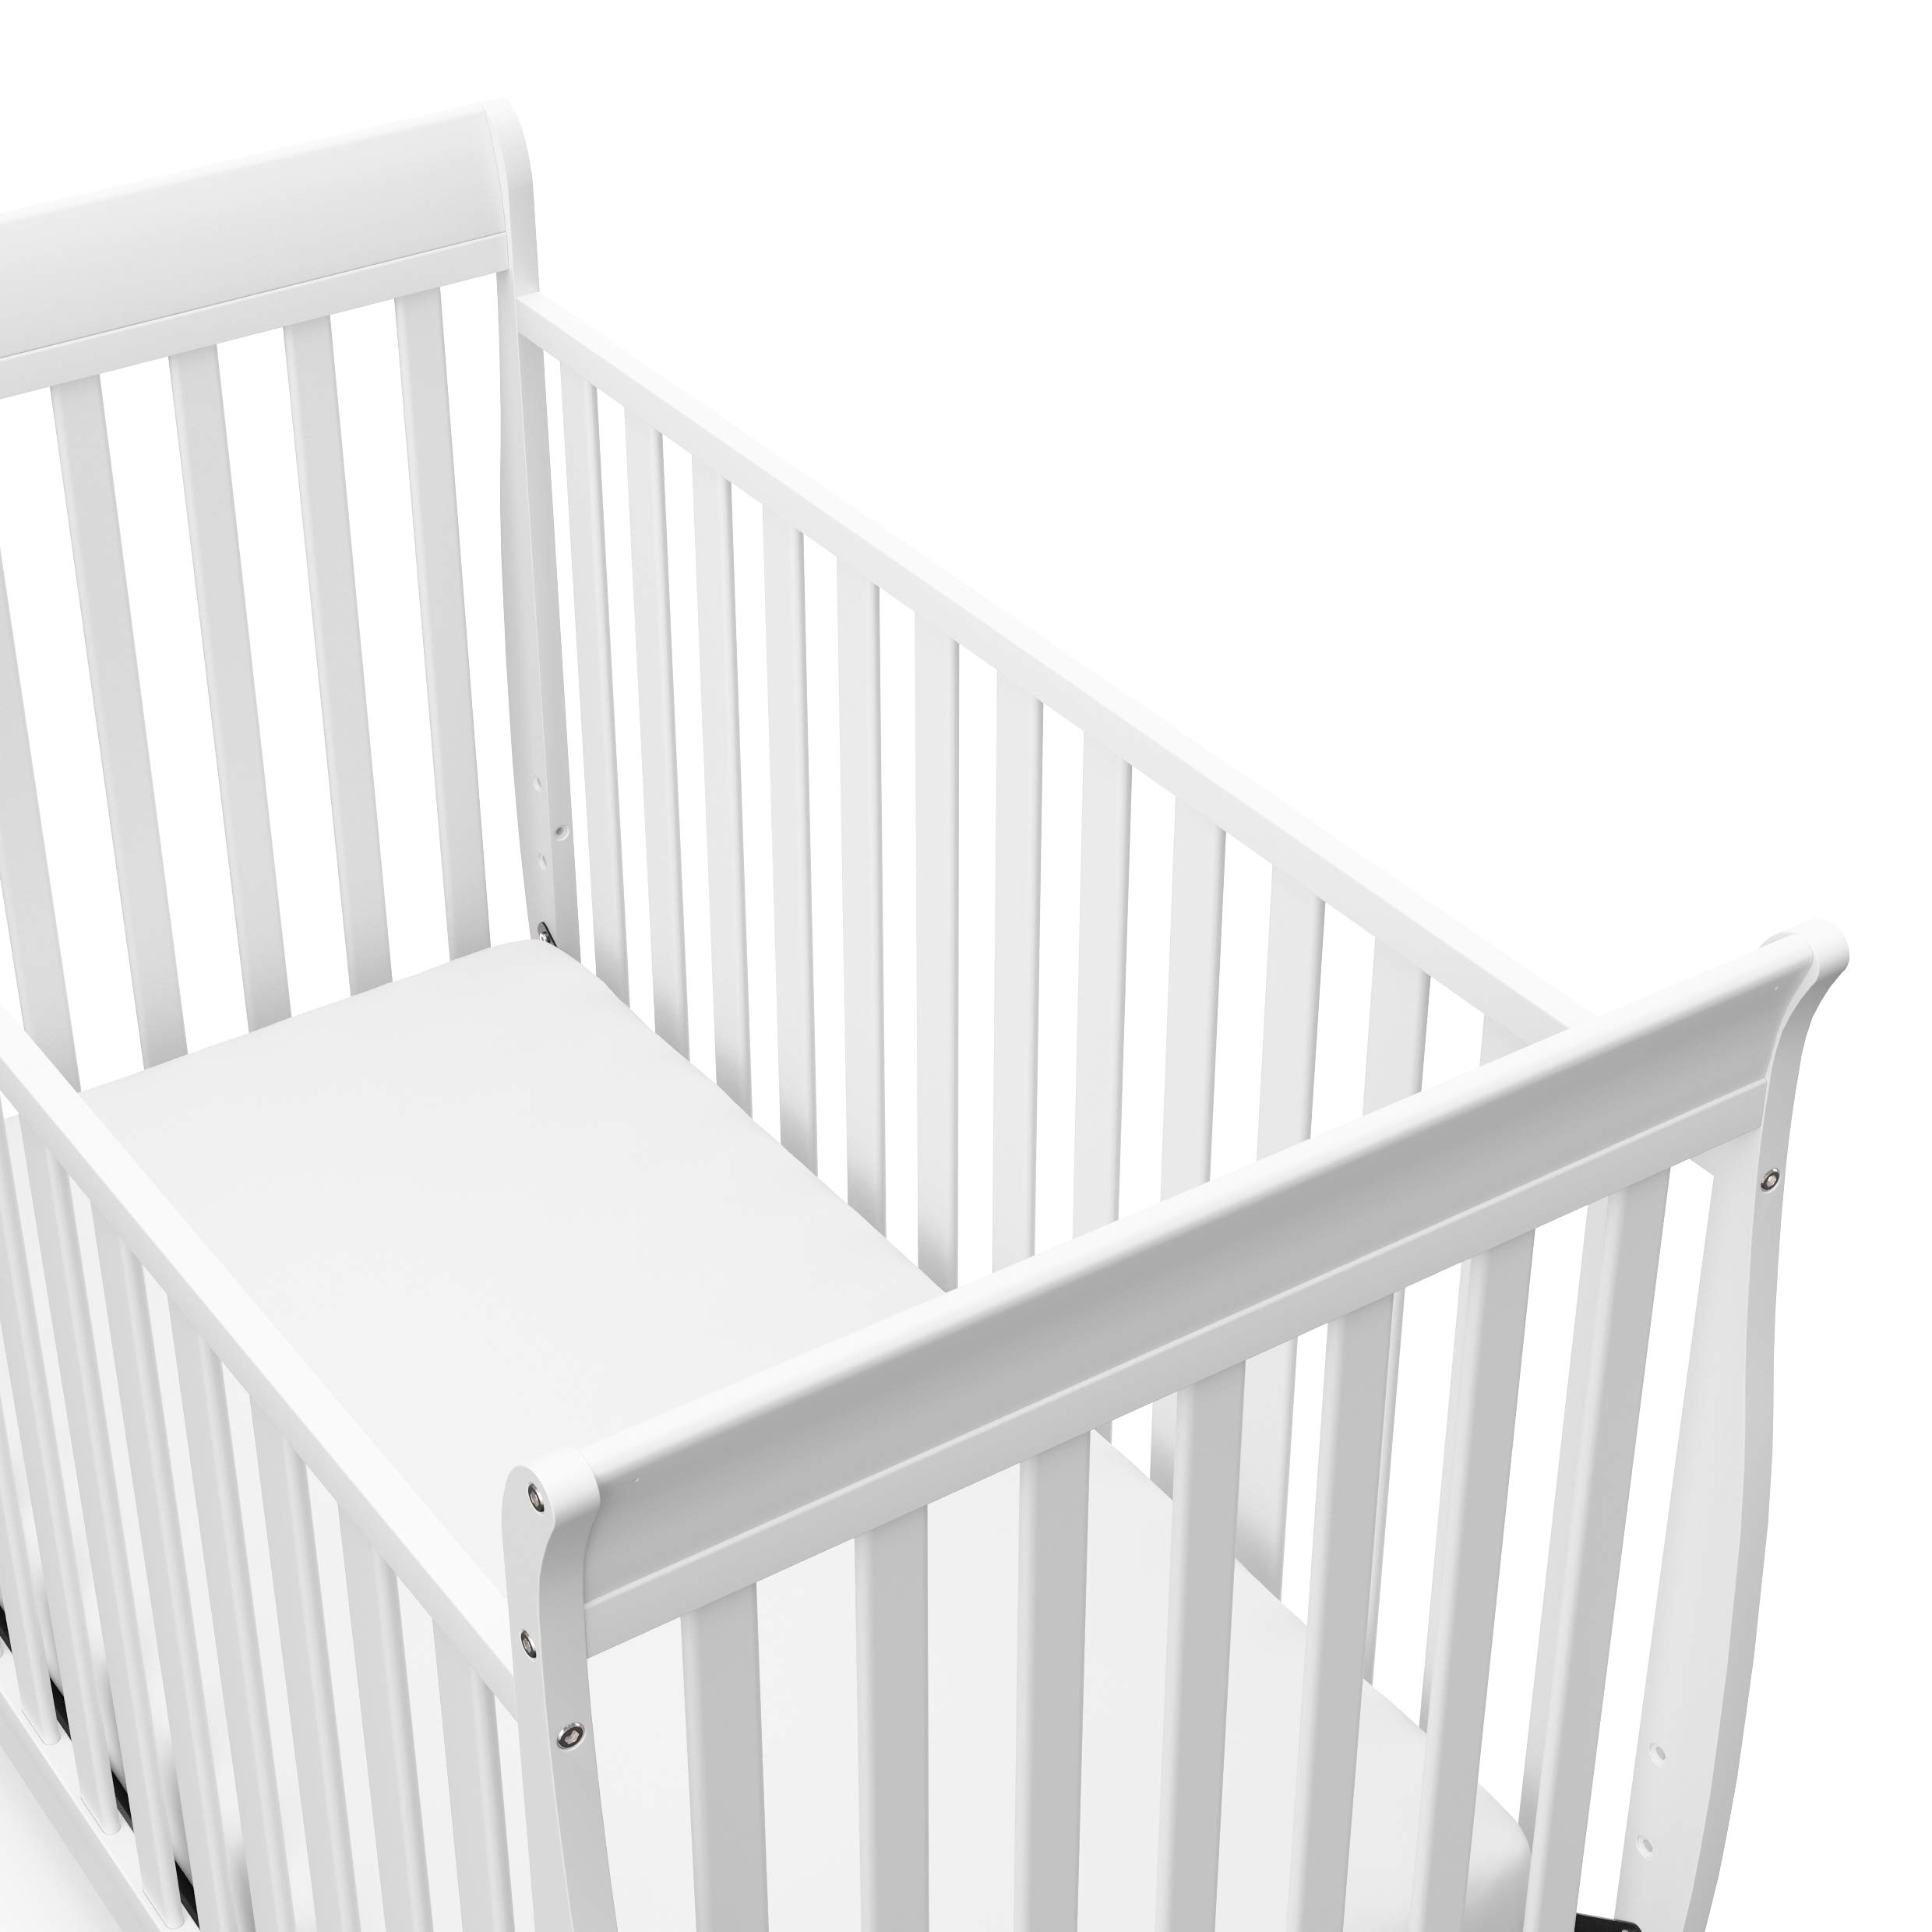 Graco Storkcraft Maxwell Convertible Crib (White) – GREENGUARD Gold Certified, Converts to Toddler Bed and Daybed, Fits Standard Full-Size Crib Mattress, Classic Crib with Traditional Sleigh Design